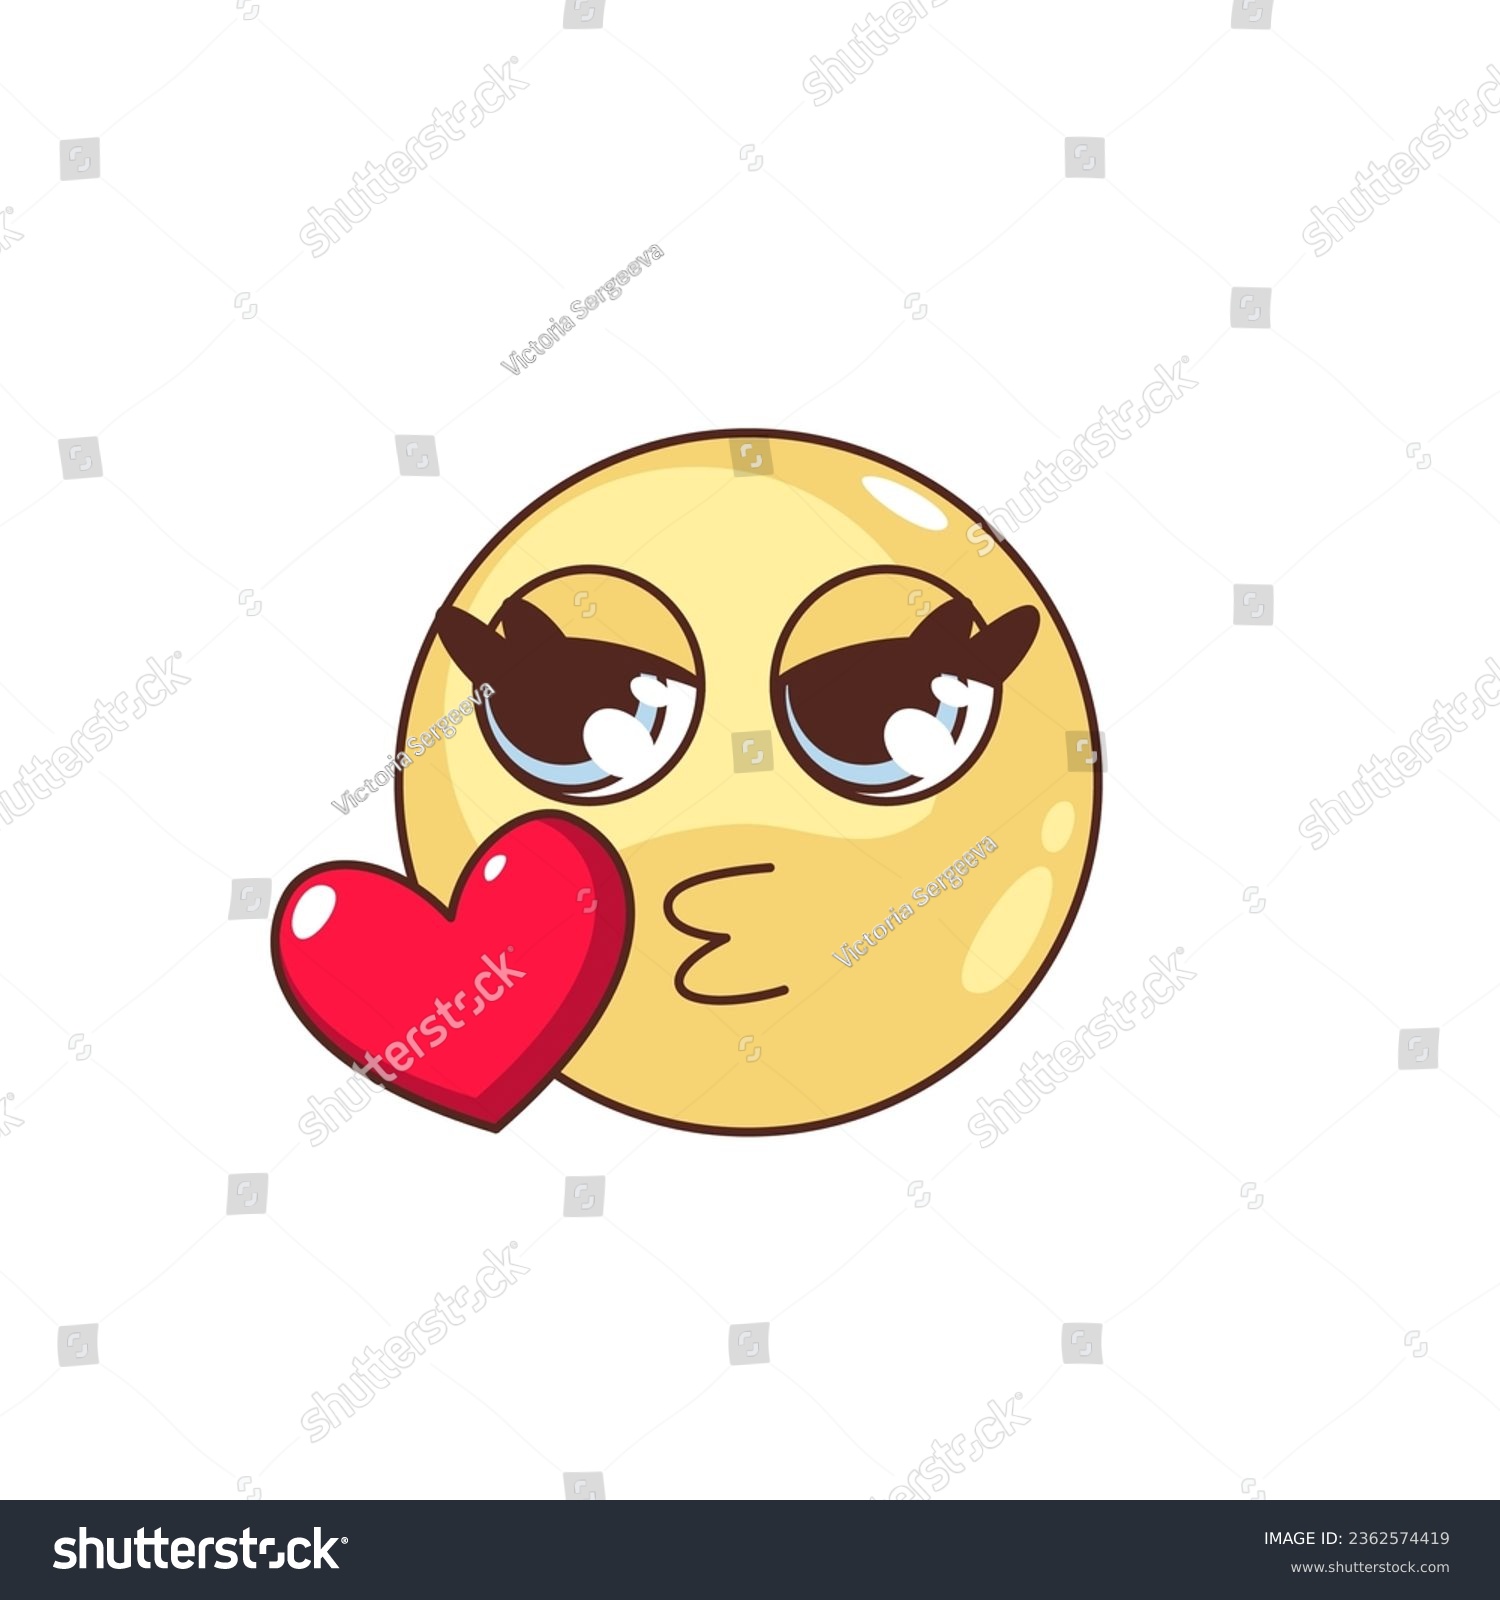 SVG of Groovy kiss emoji vector illustration. Cartoon isolated retro character with funny psychedelic face blows heart with love expression, romantic circle yellow sticker and emoji for social media svg